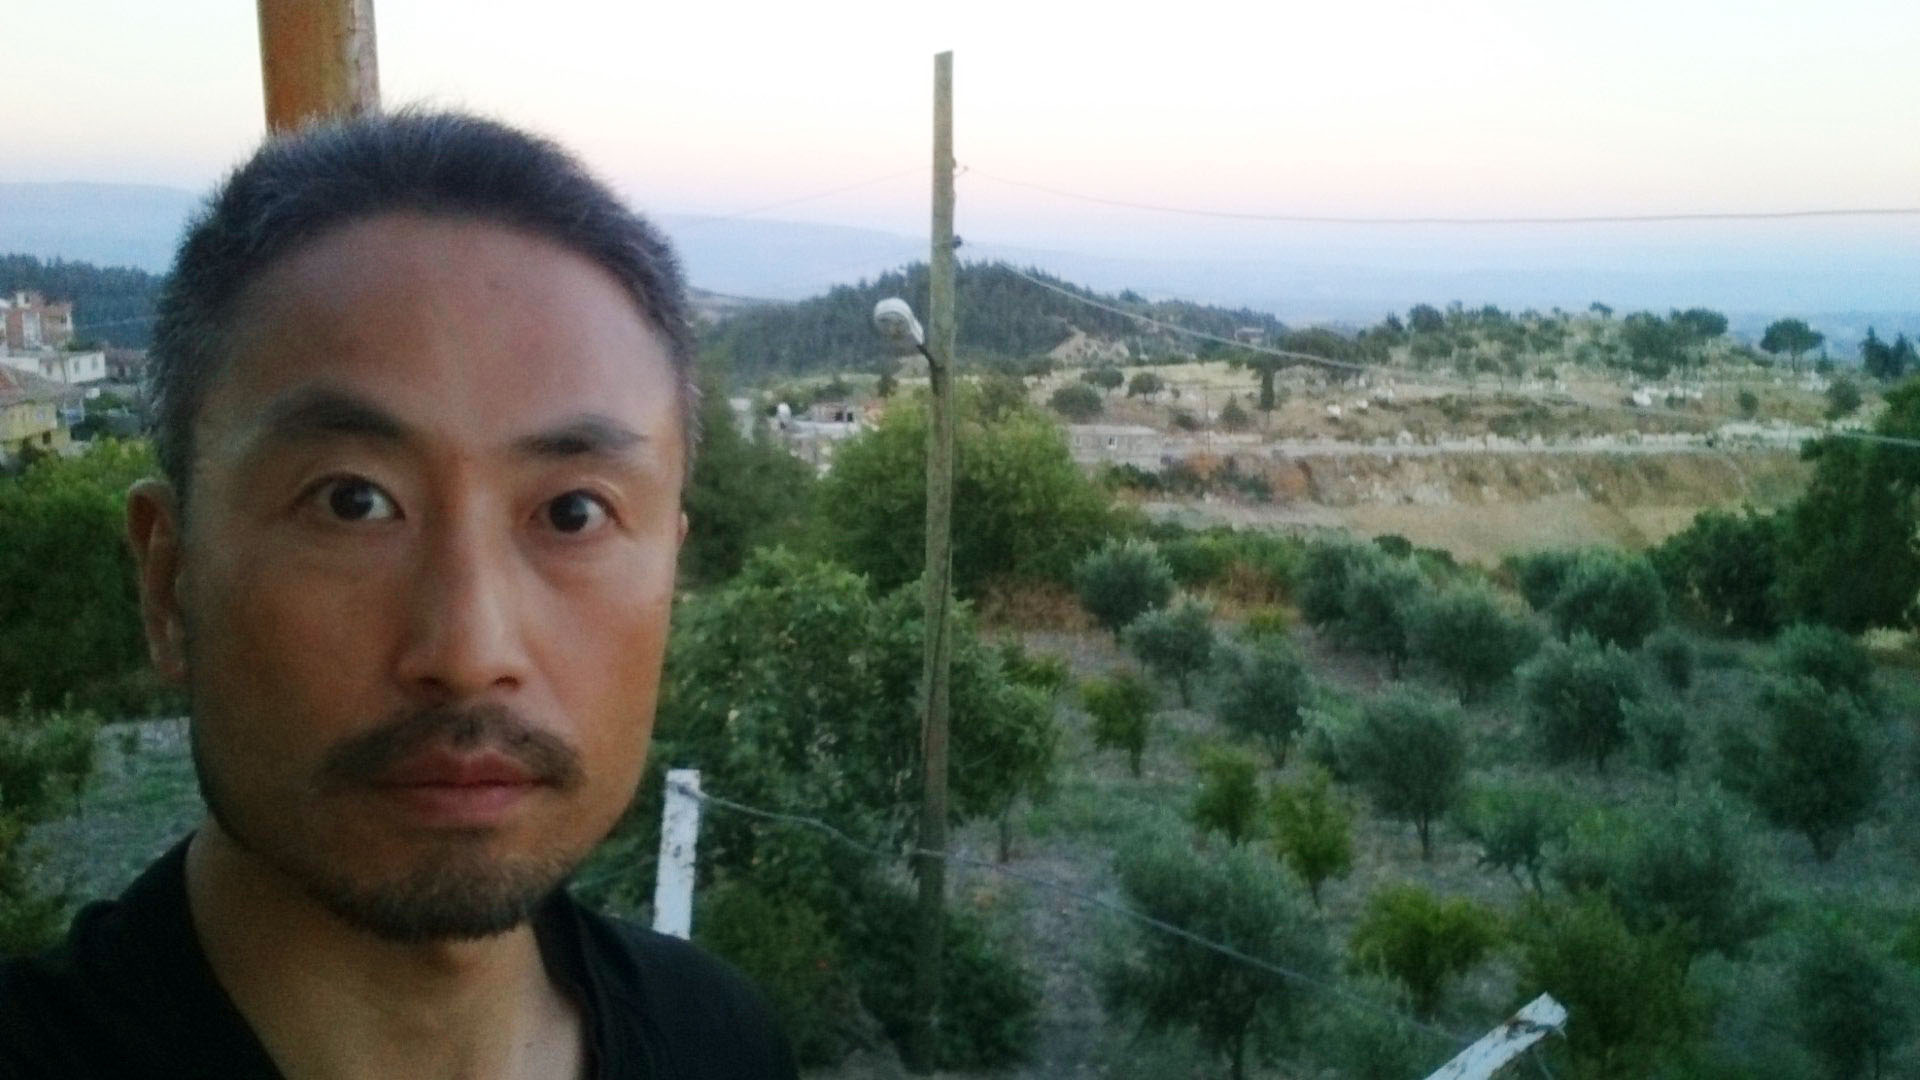 This photo shows Japanese journalist Jumpei Yasuda, reportedly kidnapped in Syria. The photo was sent by via e-mail to a Kyodo News photographer on June 23, 2015, before his departure to Syria, with the message reading, "I will smuggle myself into Syria from now."